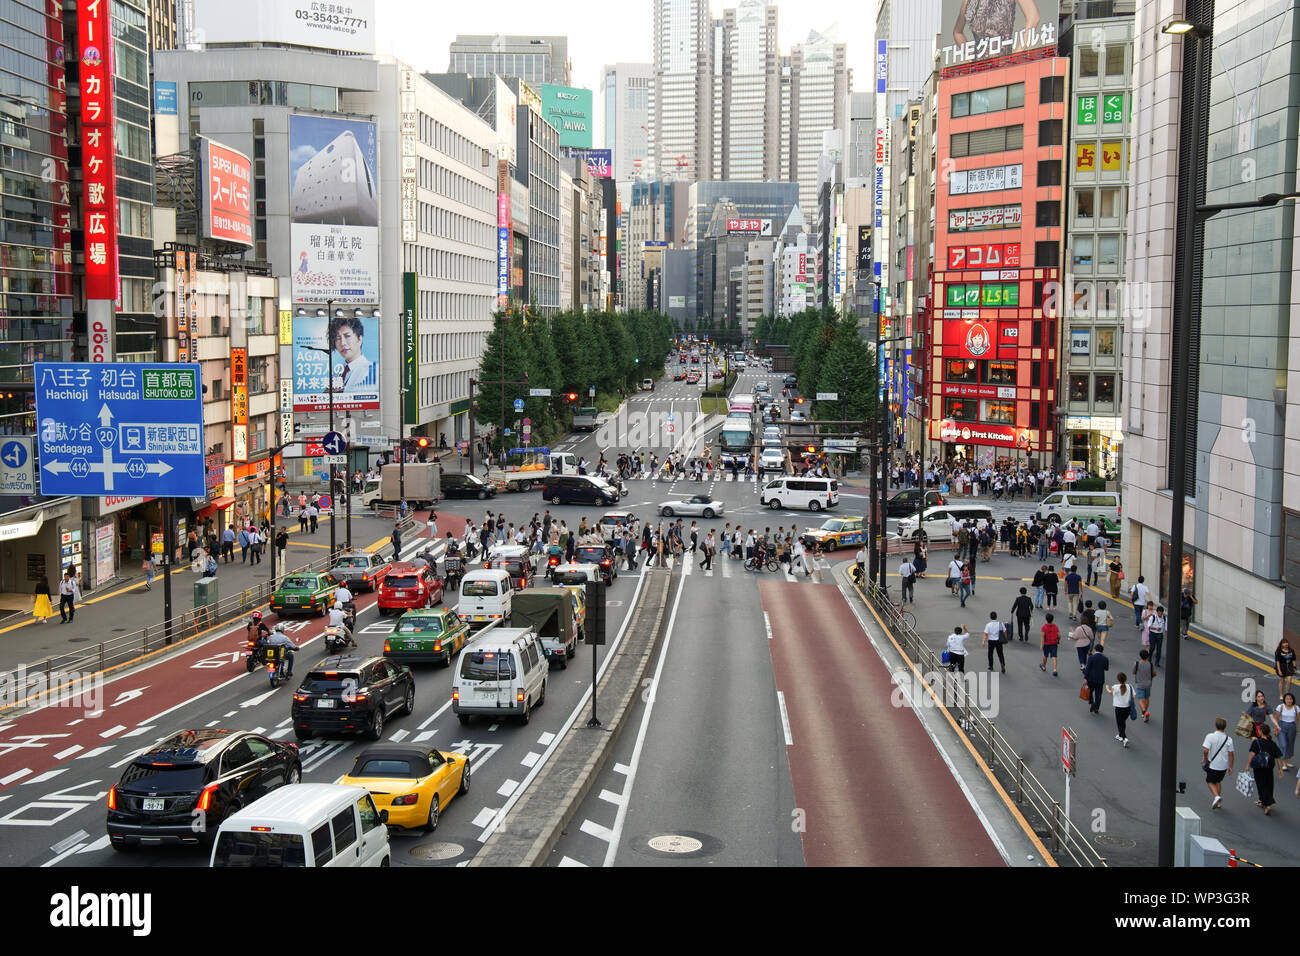 Street scenes with traffic and pedestrian intersection in Shinjuku City in Tokyo Japan Stock Photo